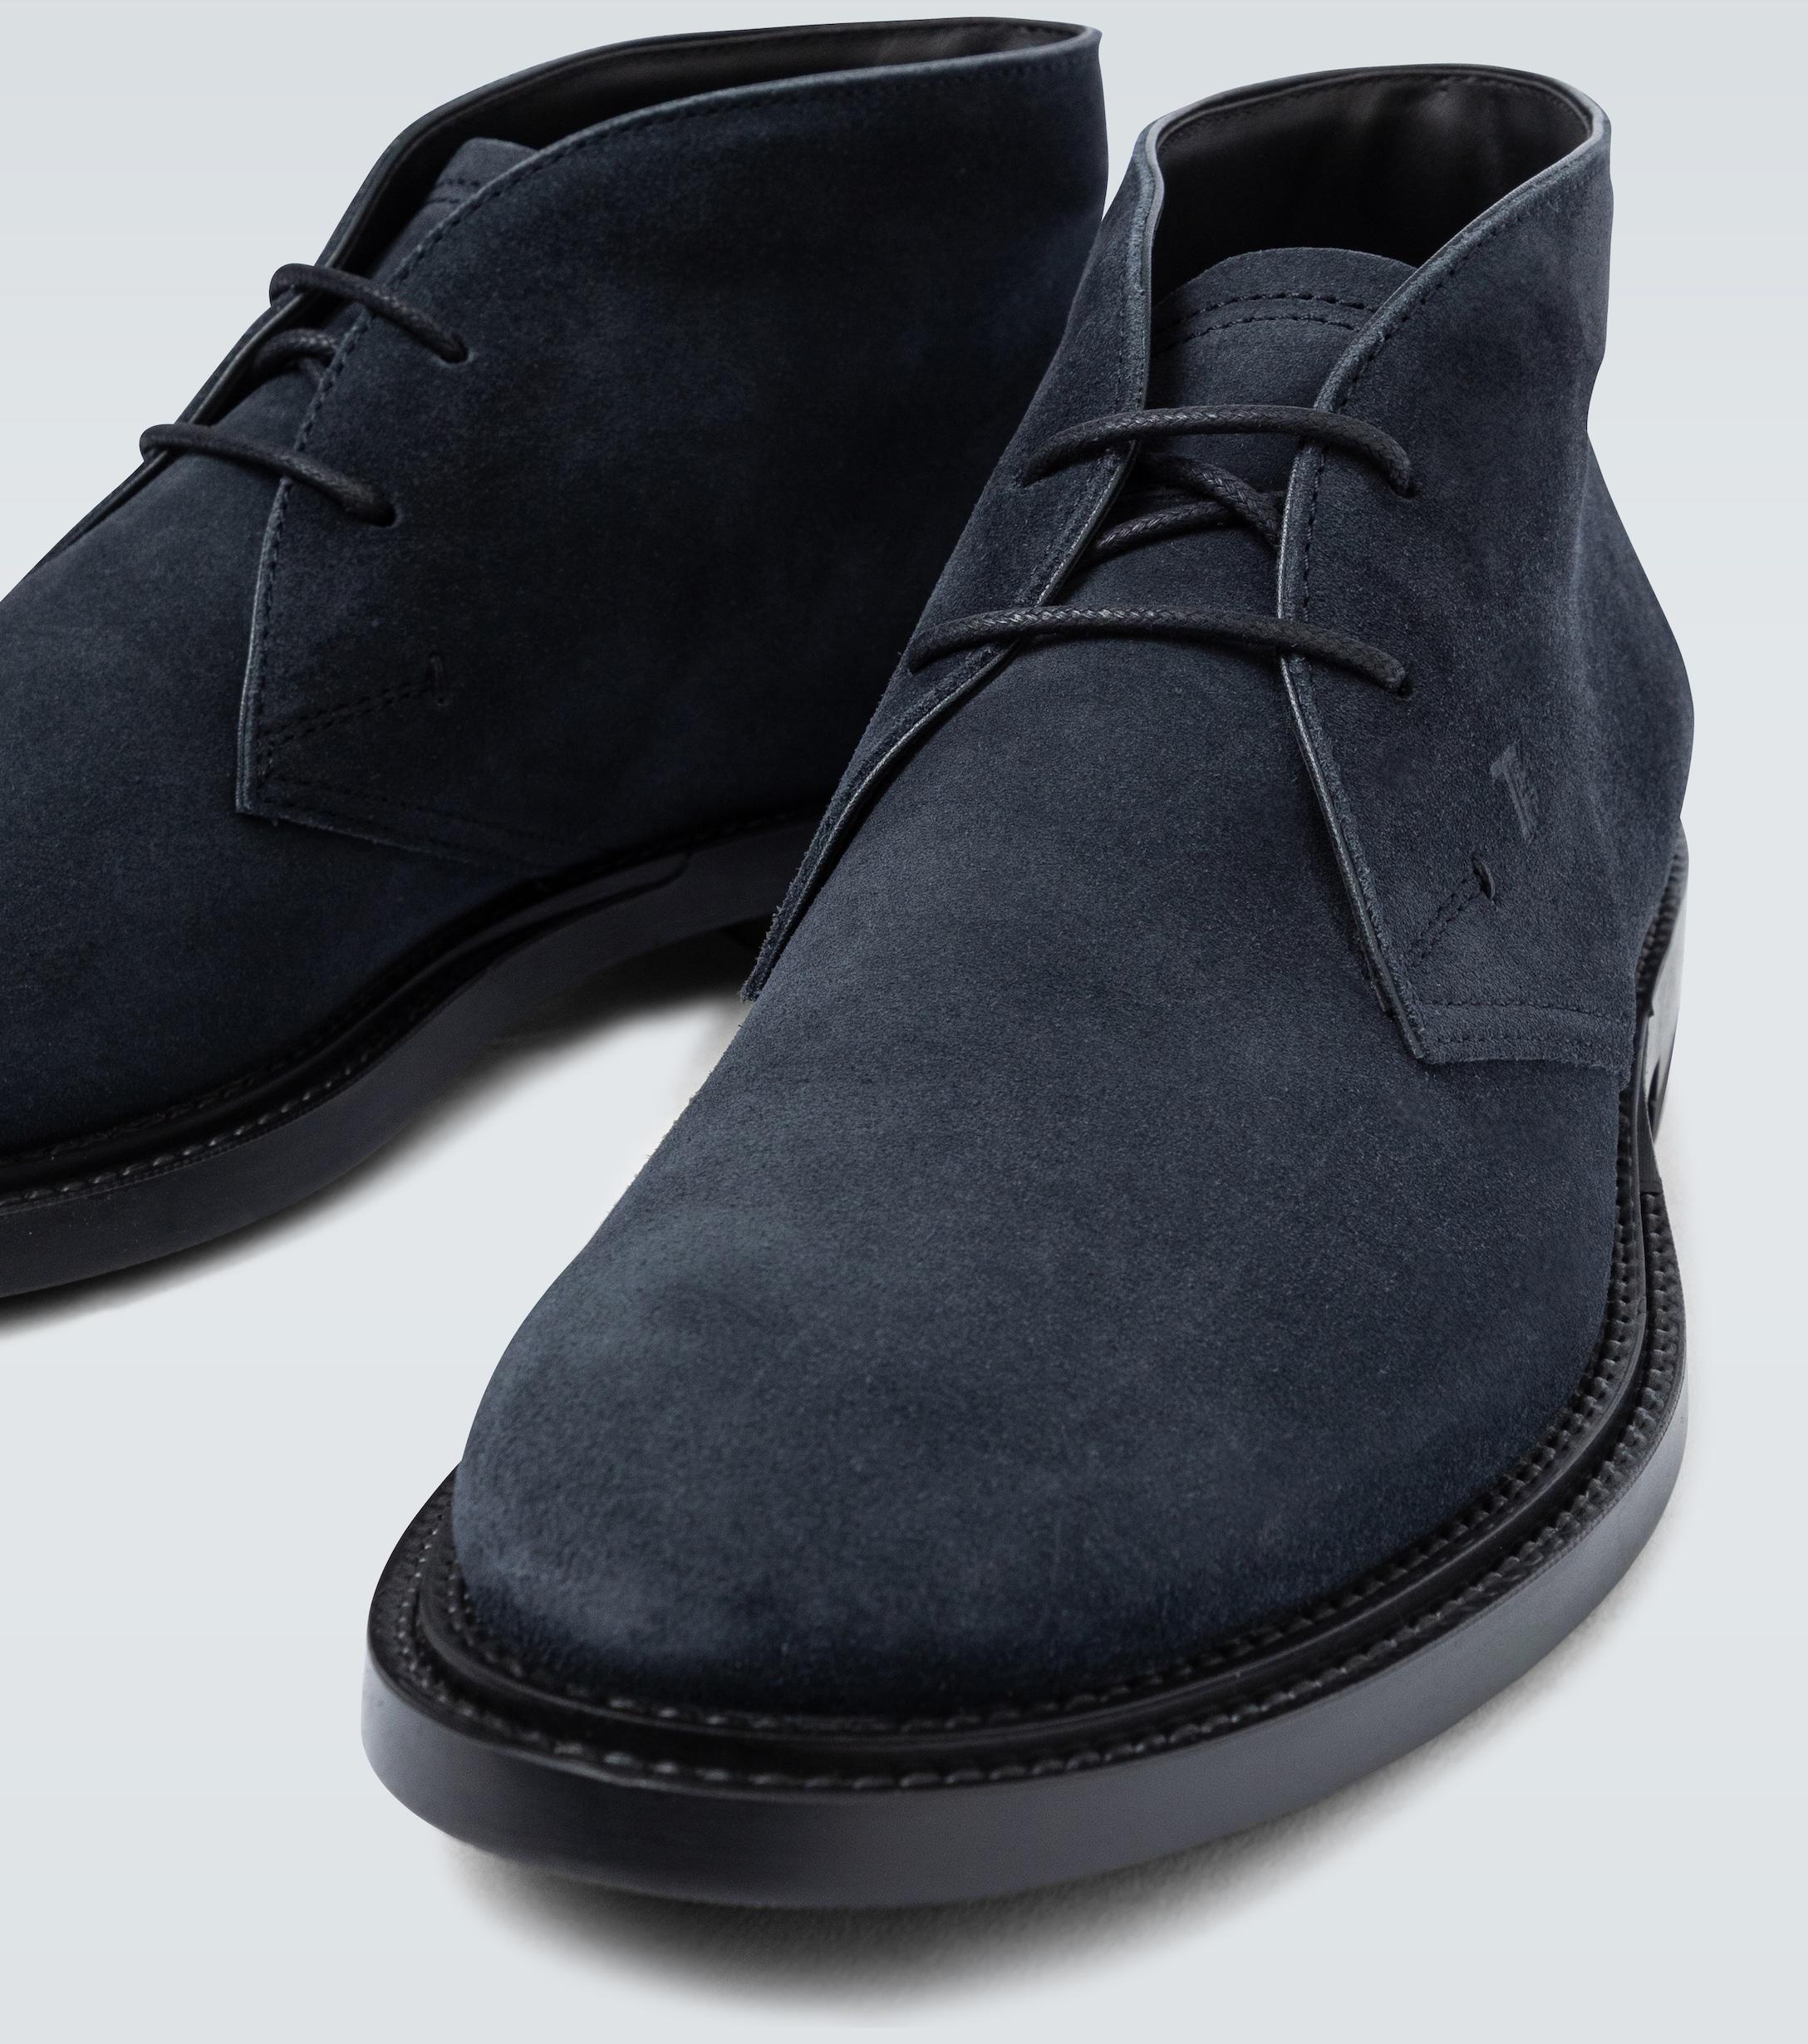 Tod's Suede Desert Boots in Blue for Men - Lyst